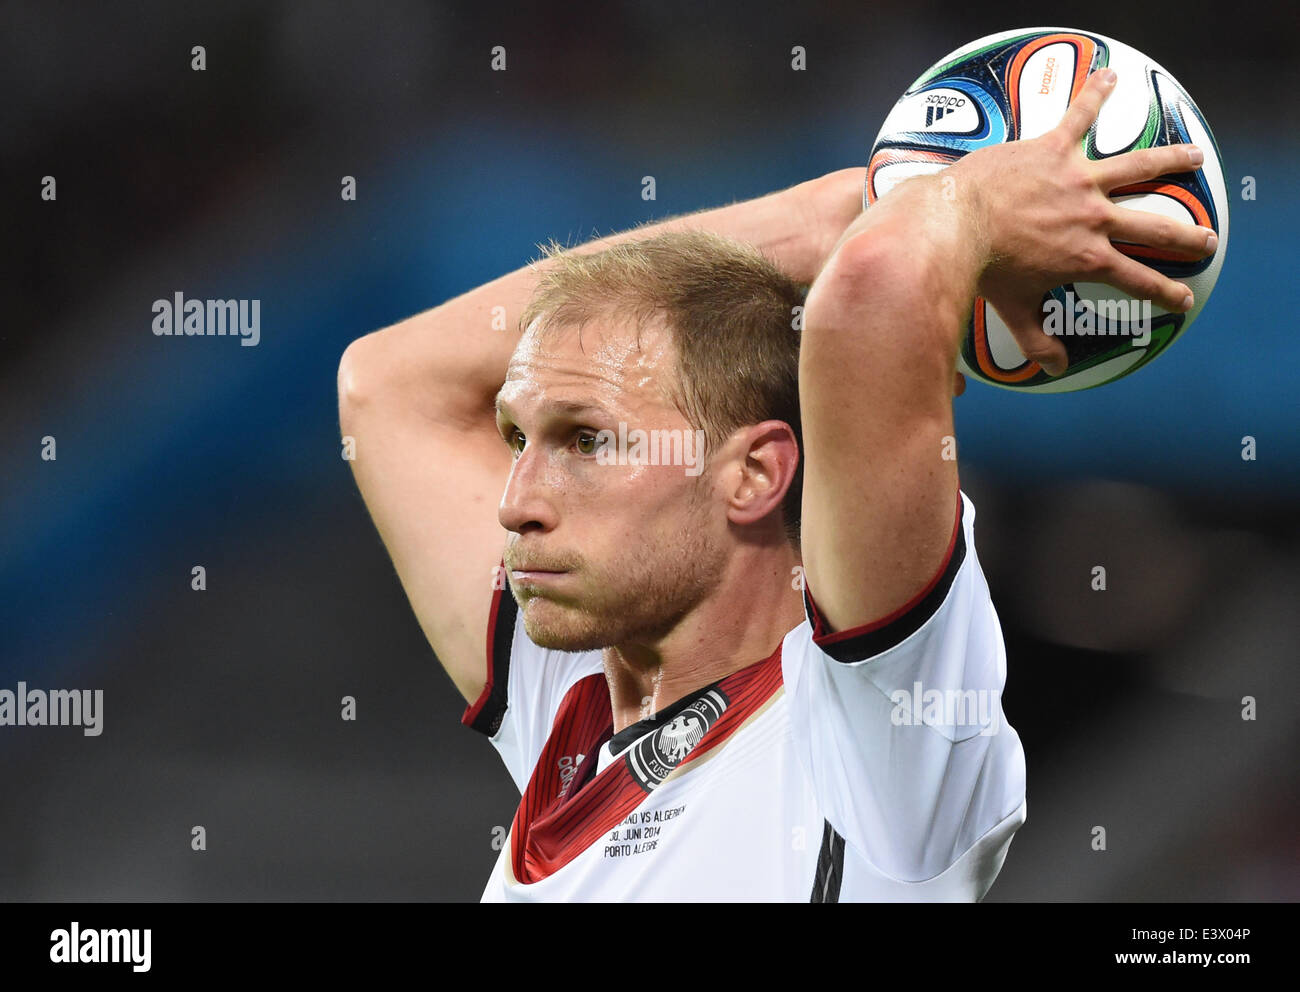 Porto Alegre, Brazil. 30th June, 2014. Germany's Benedikt Hoewedes in action during the FIFA World Cup 2014 round of 16 soccer match between Germany and Algeria at the Estadio Beira-Rio in Porto Alegre, Brazil, 30 June 2014. Photo: Marcus Brandt/dpa/Alamy Live News Stock Photo